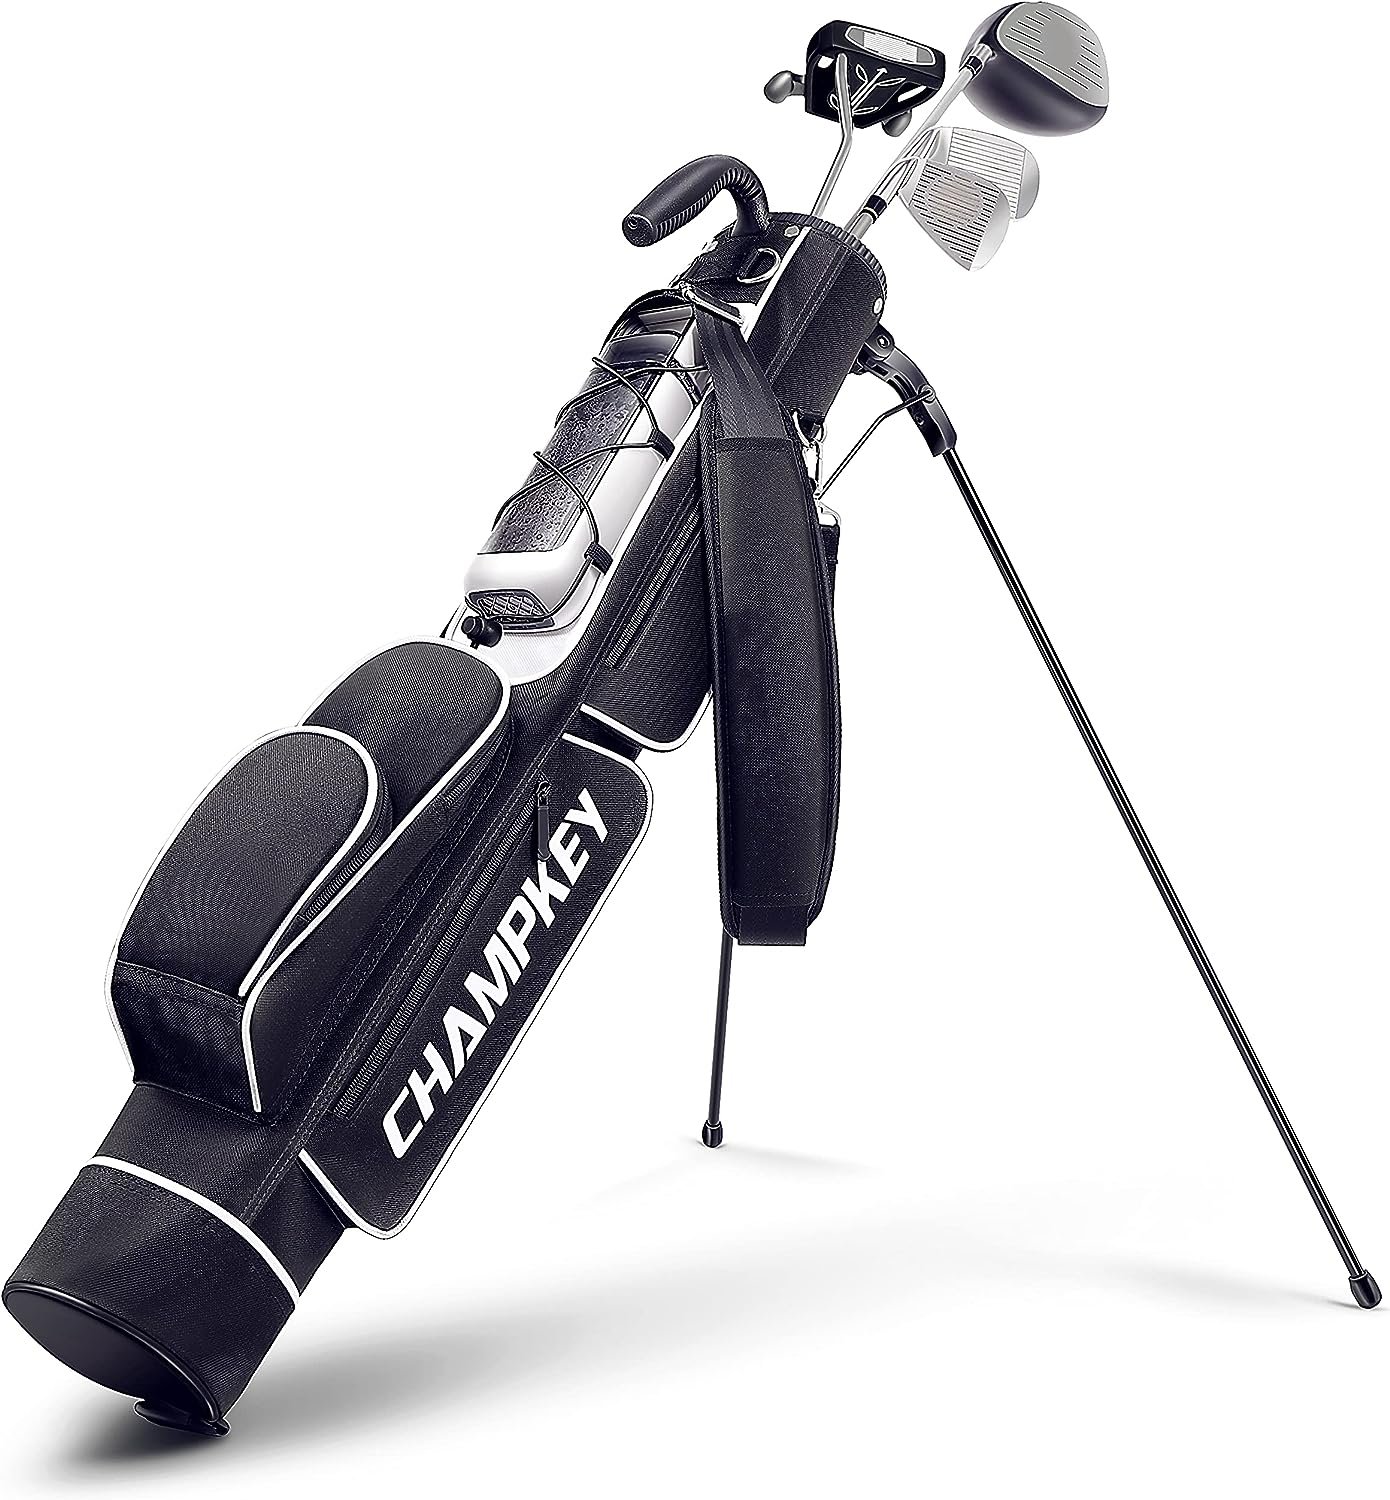 CHAMPKEY Lightweight Golf Stand Bag | Professional Pitch Golf Bag Ideal for The Driving Range, Par 3 and Executive Courses